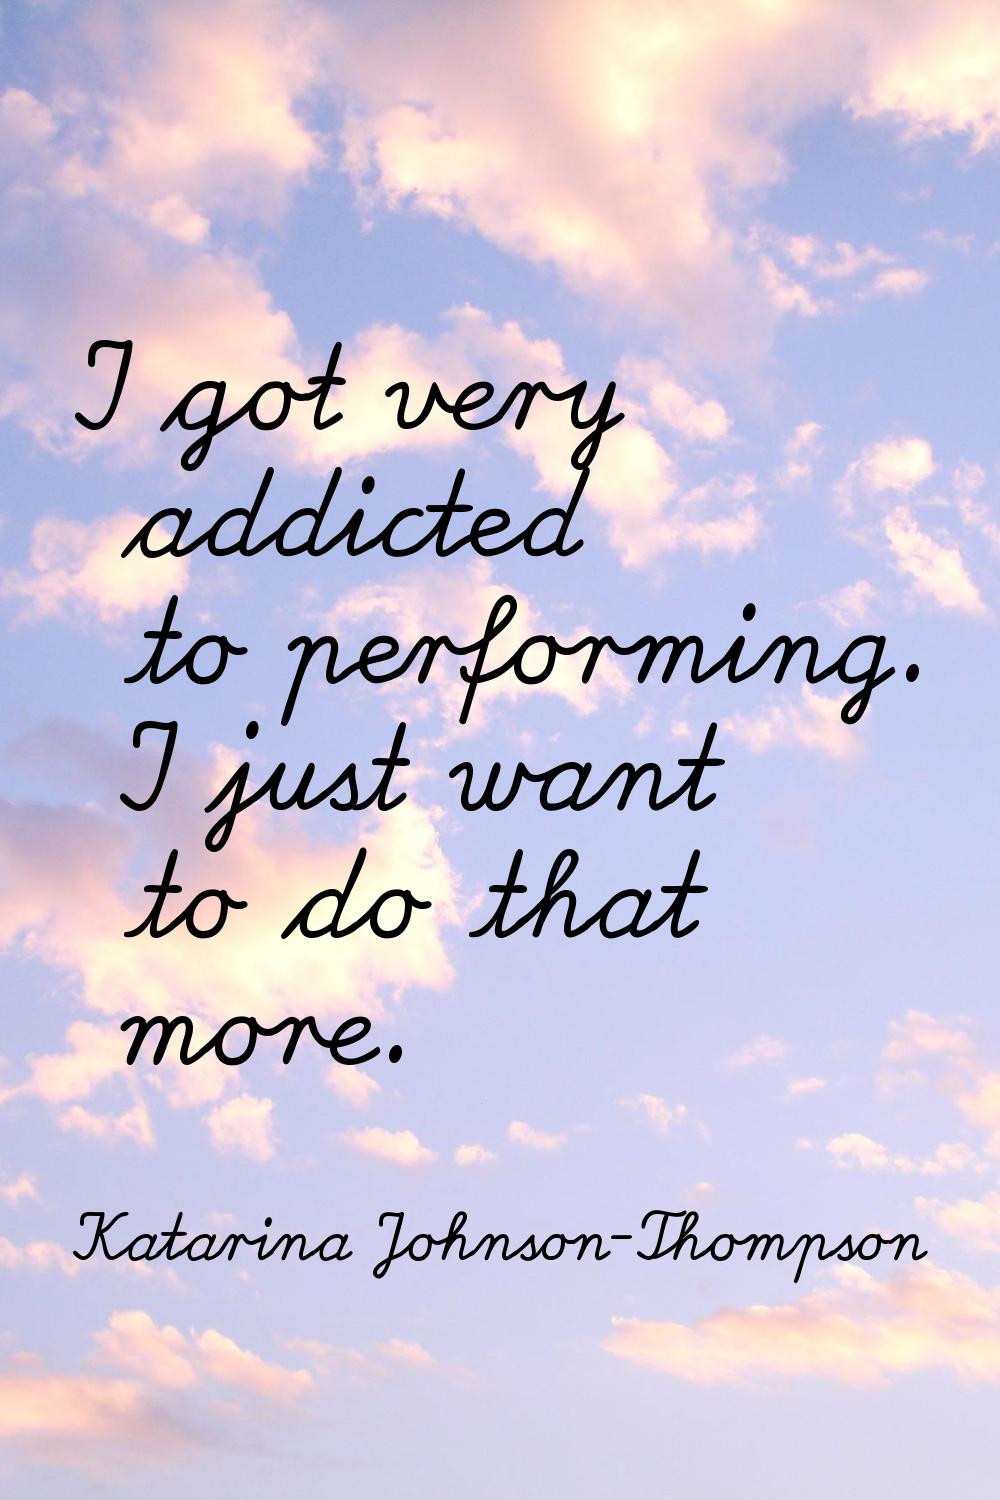 I got very addicted to performing. I just want to do that more.